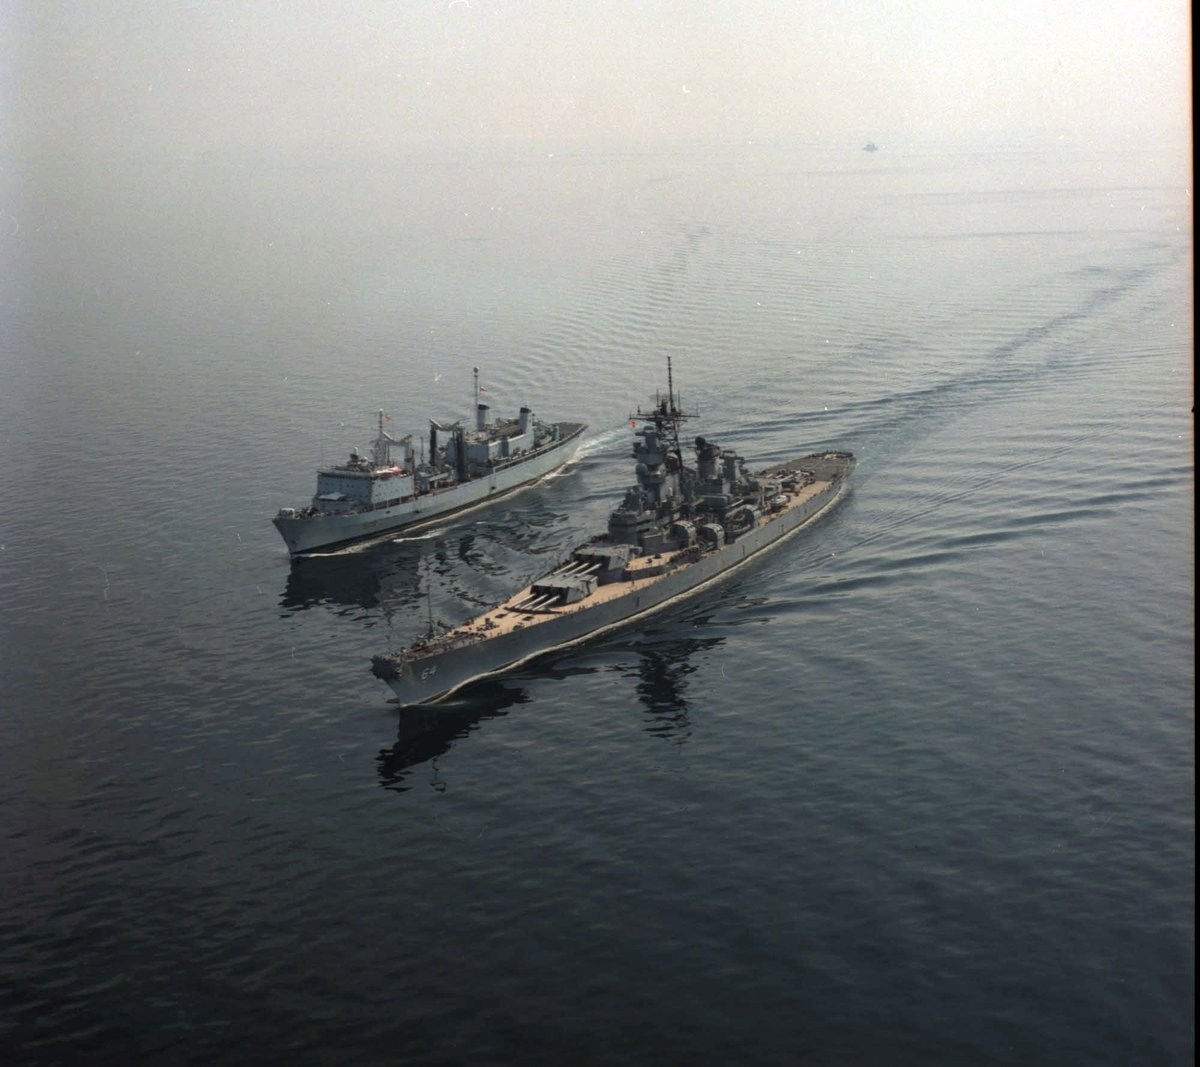 HMCS Protecteur and USS Wisconsin in the Persian Gulf, Op Friction, December 1990. (LAC e999901679-u) #RCN #History